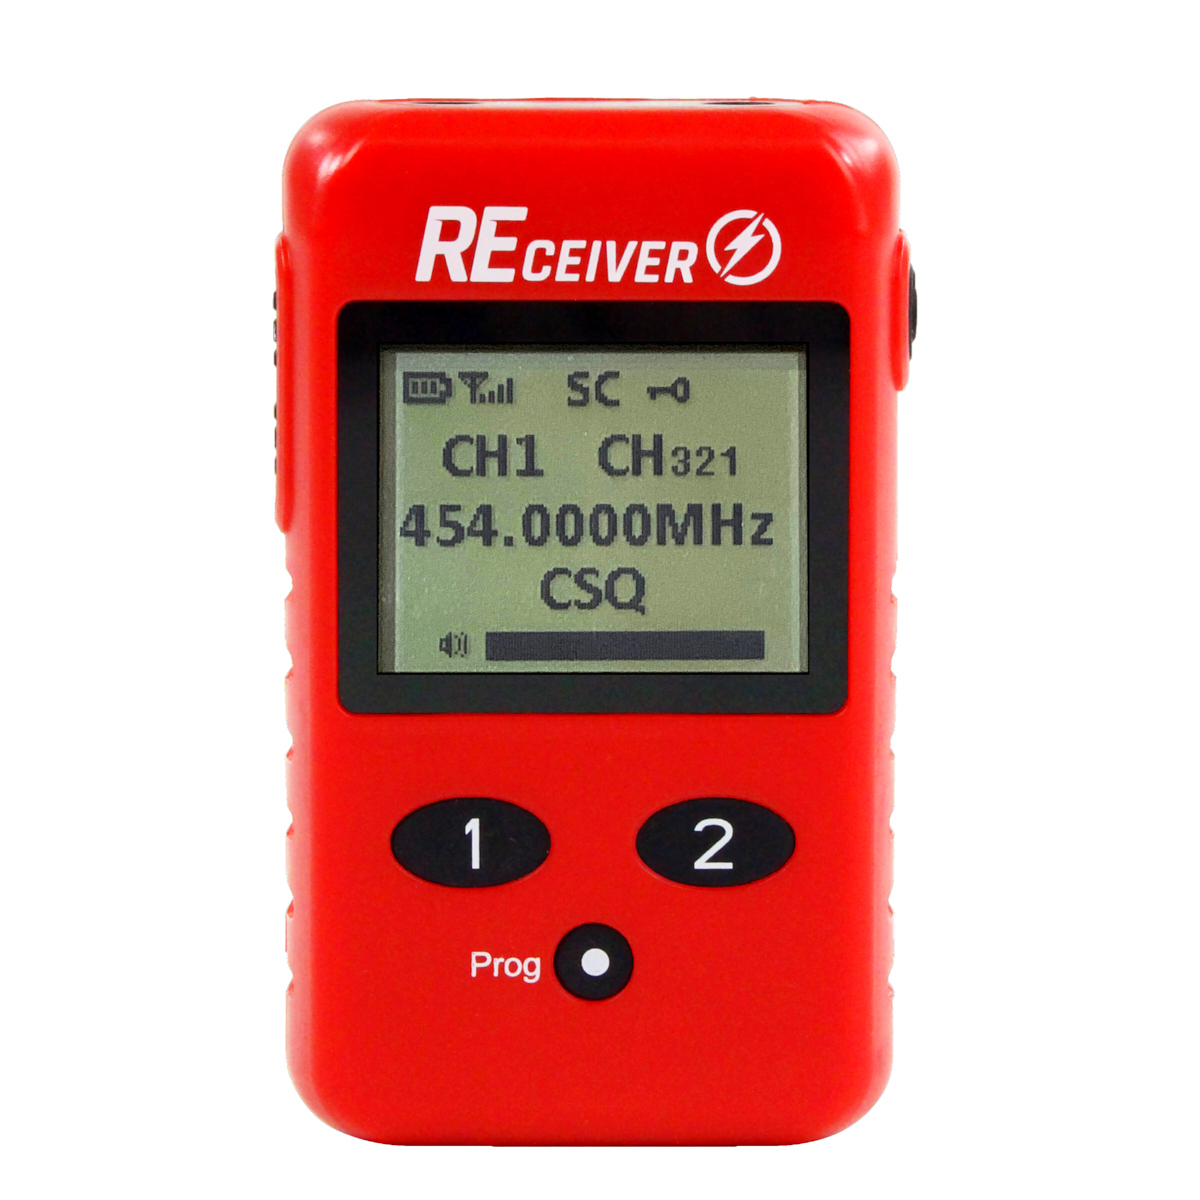 Picture of Racing Electronics RCERECEIVER UHF 450-470MHZ Radio Receiver, Red